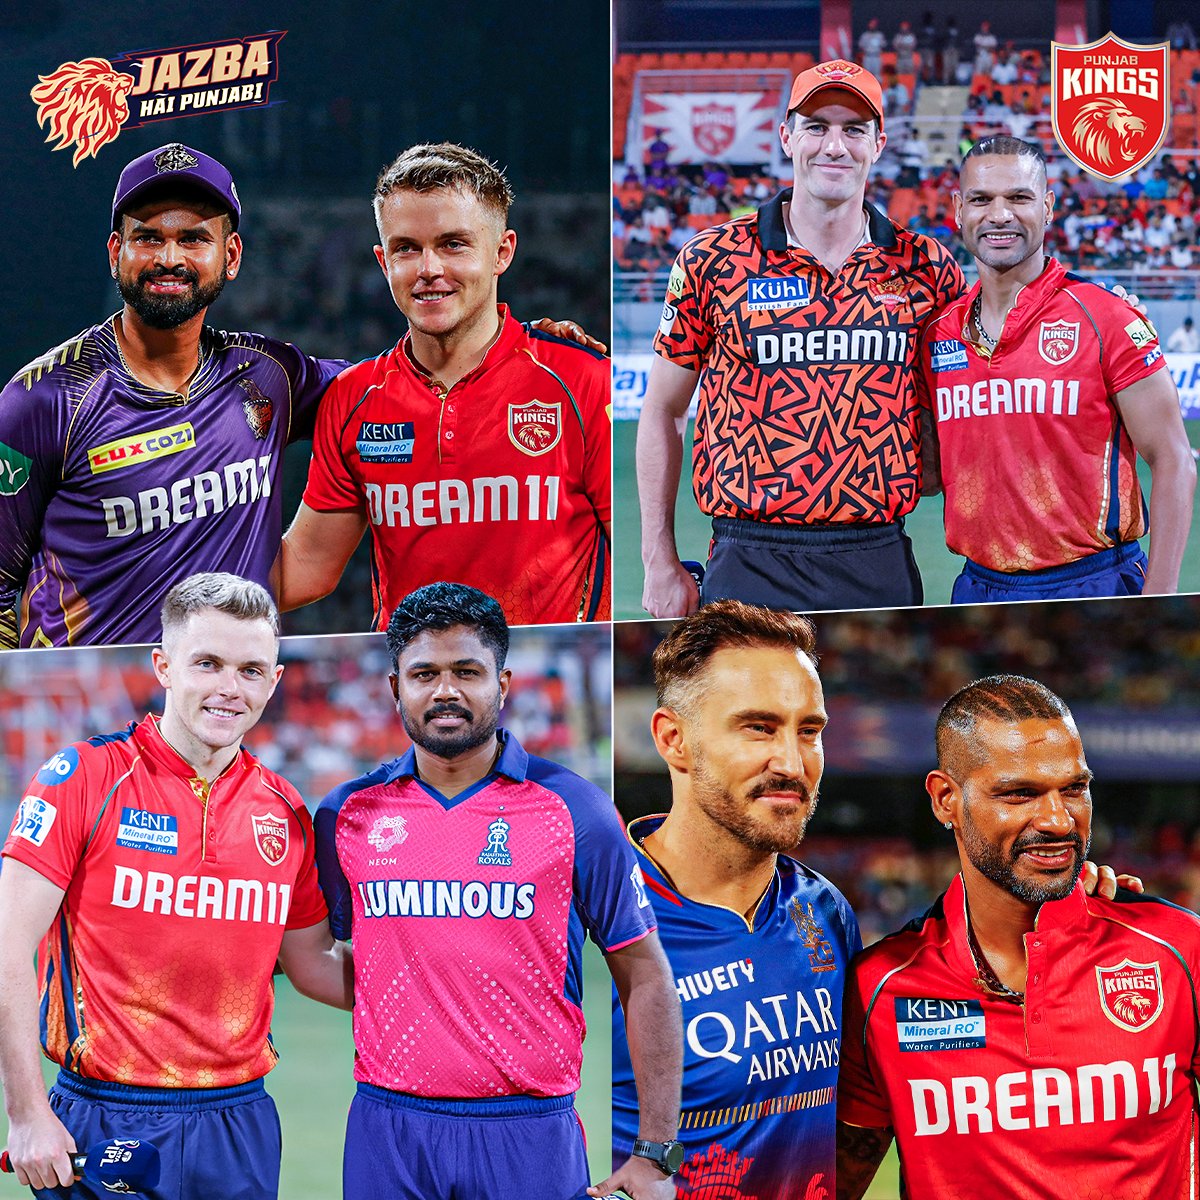 𝟐 𝙢𝙤𝙣𝙩𝙝𝙨. 𝟕𝟎 𝙜𝙖𝙢𝙚𝙨. 𝟒 𝙩𝙚𝙖𝙢𝙨. 👊 All the best to the sides for the #TATAIPL2024 playoffs! 🤝 May the best team lift the 🏆. #SaddaPunjab #PunjabKings #JazbaHaiPunjabi